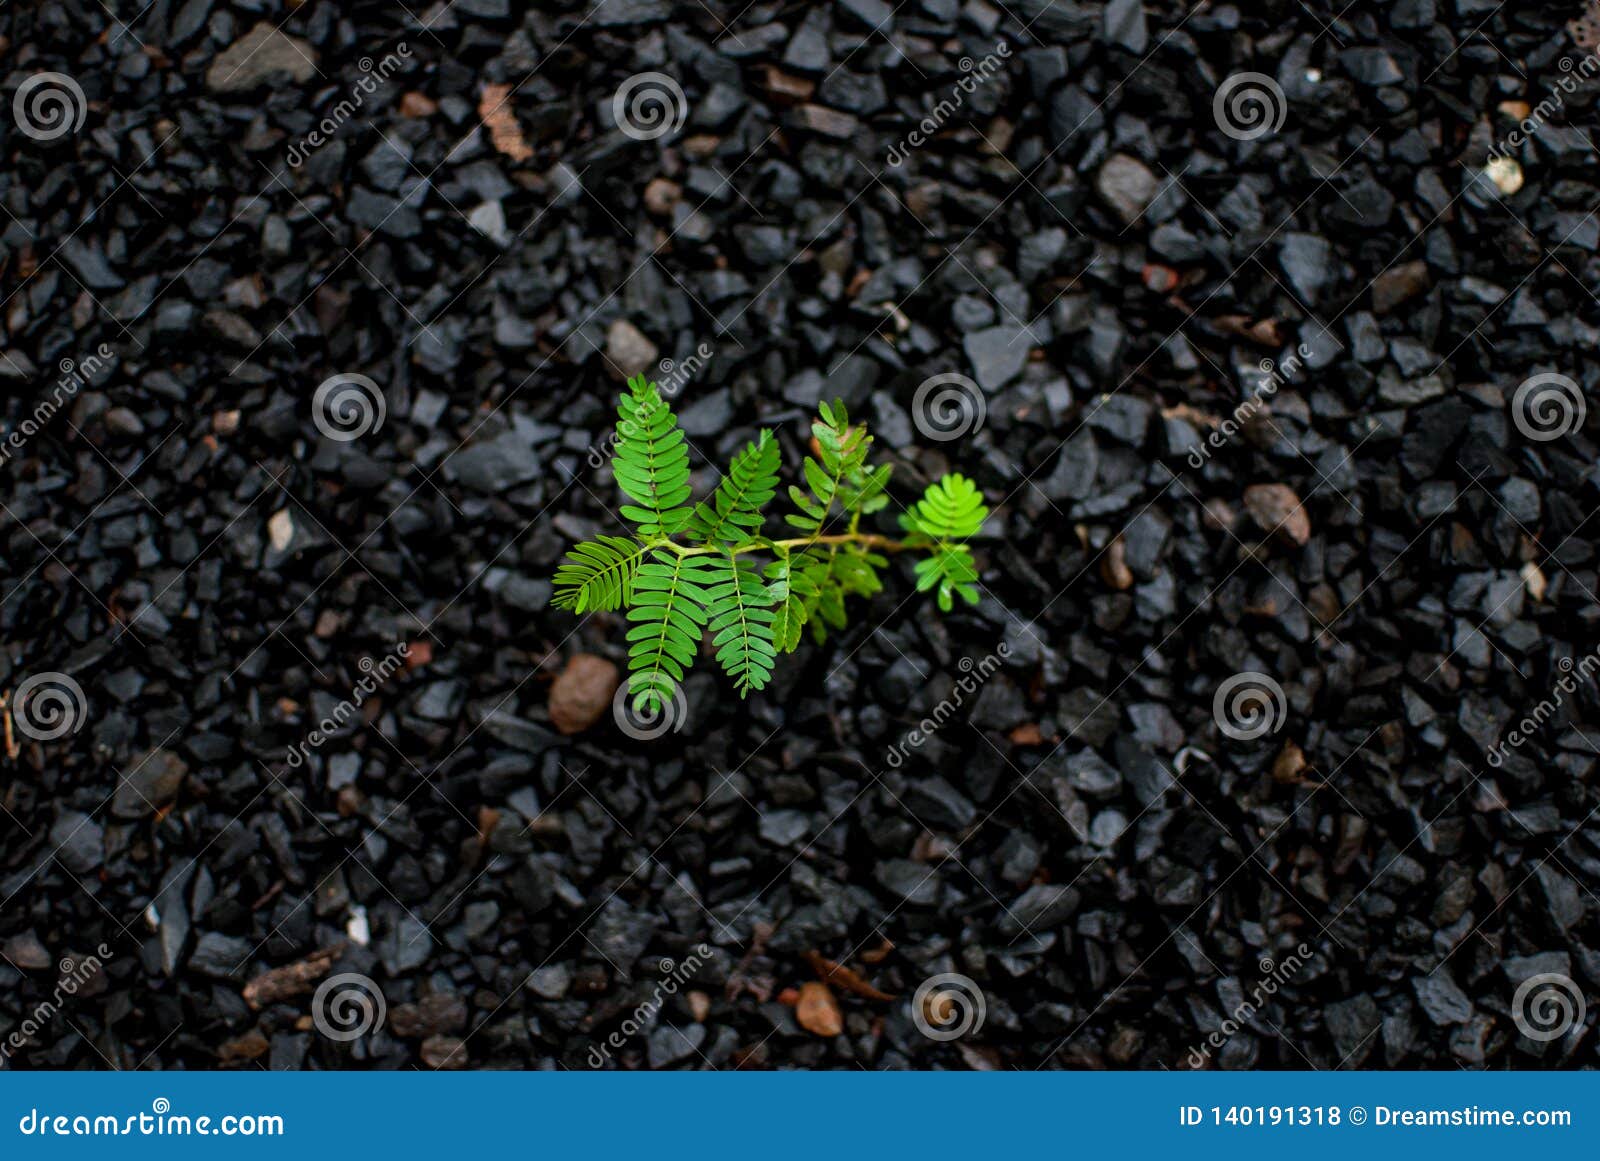 Nature Always Finds A Way To Survive Stock Photo - Image of dirt, curled:  140191318